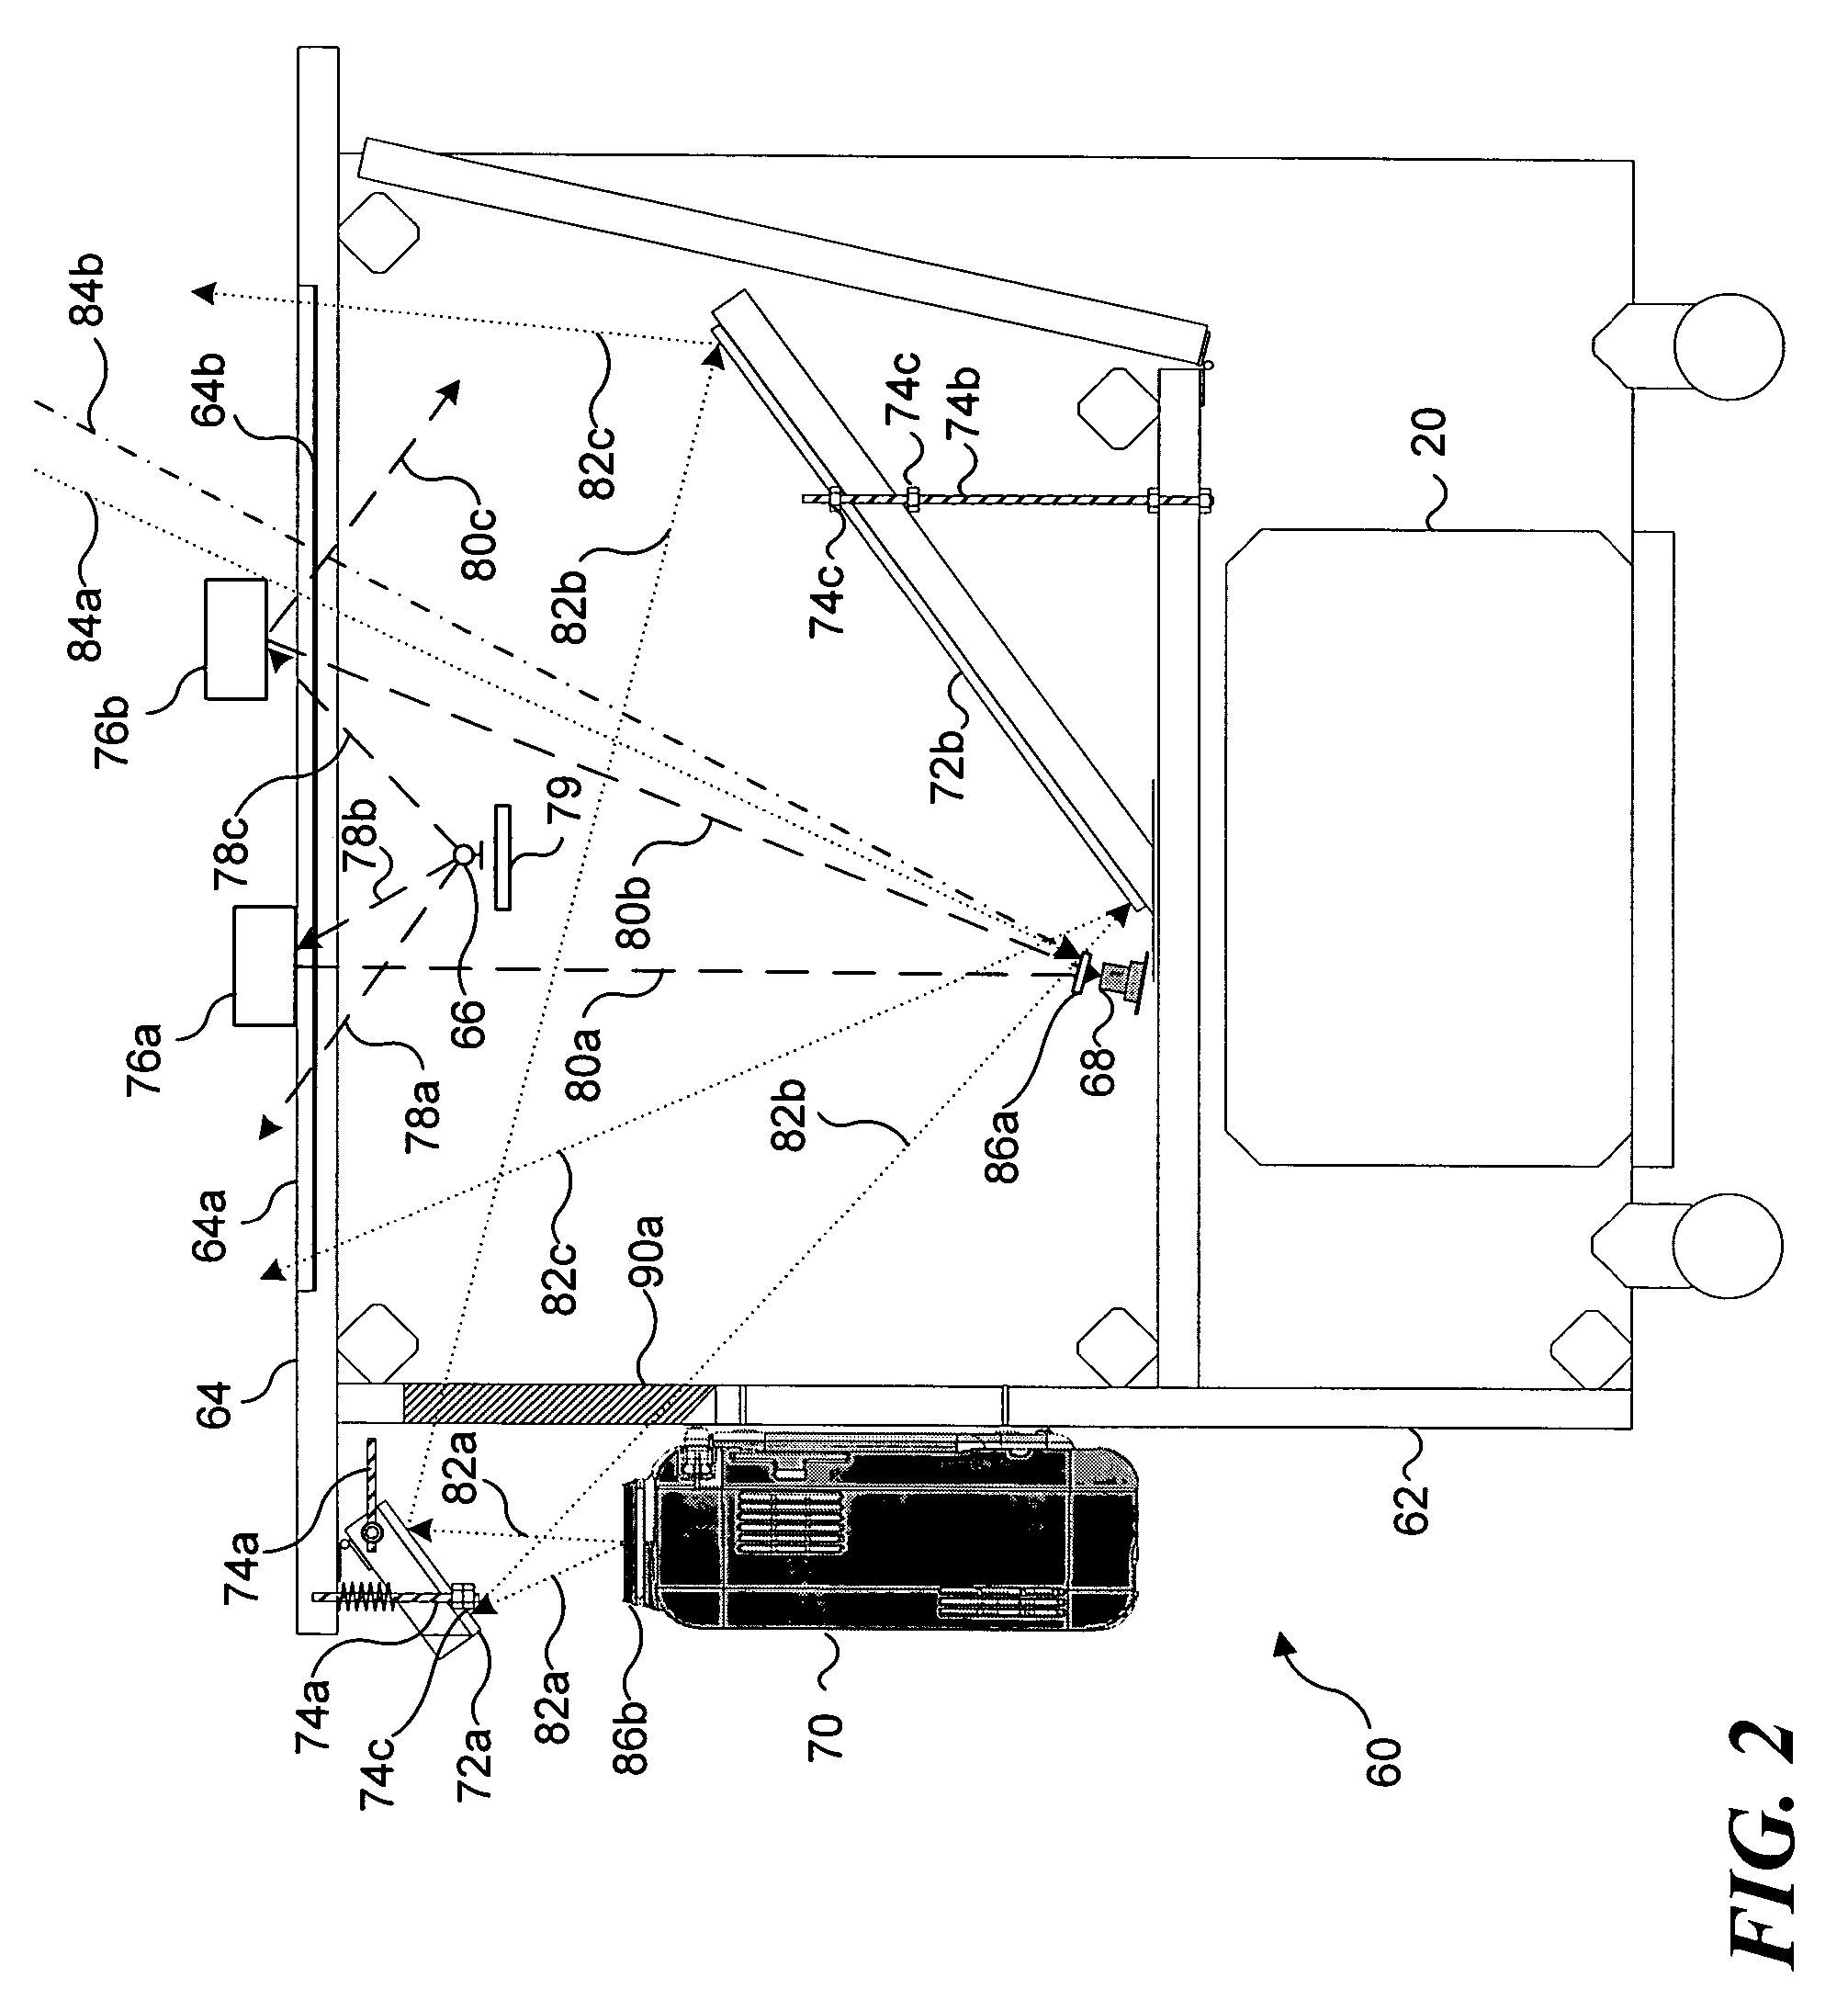 Disposing identifying codes on a user's hand to provide input to an interactive display application